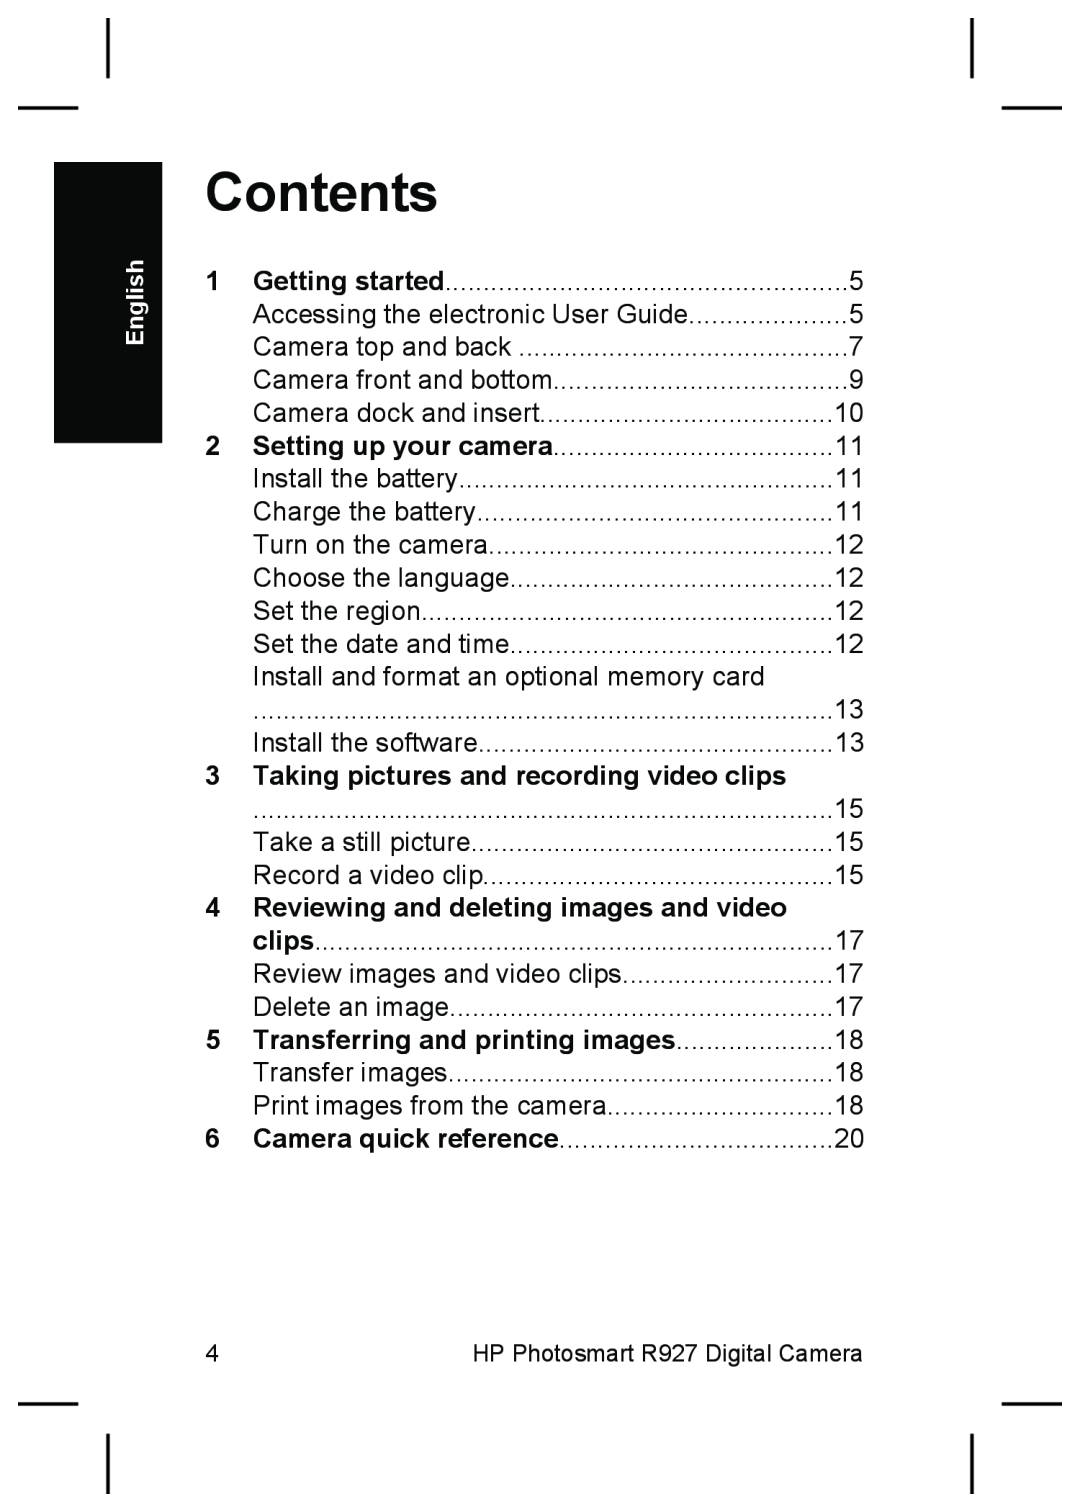 HP R927 manual Contents, Taking pictures and recording video clips, Reviewing and deleting images and video 